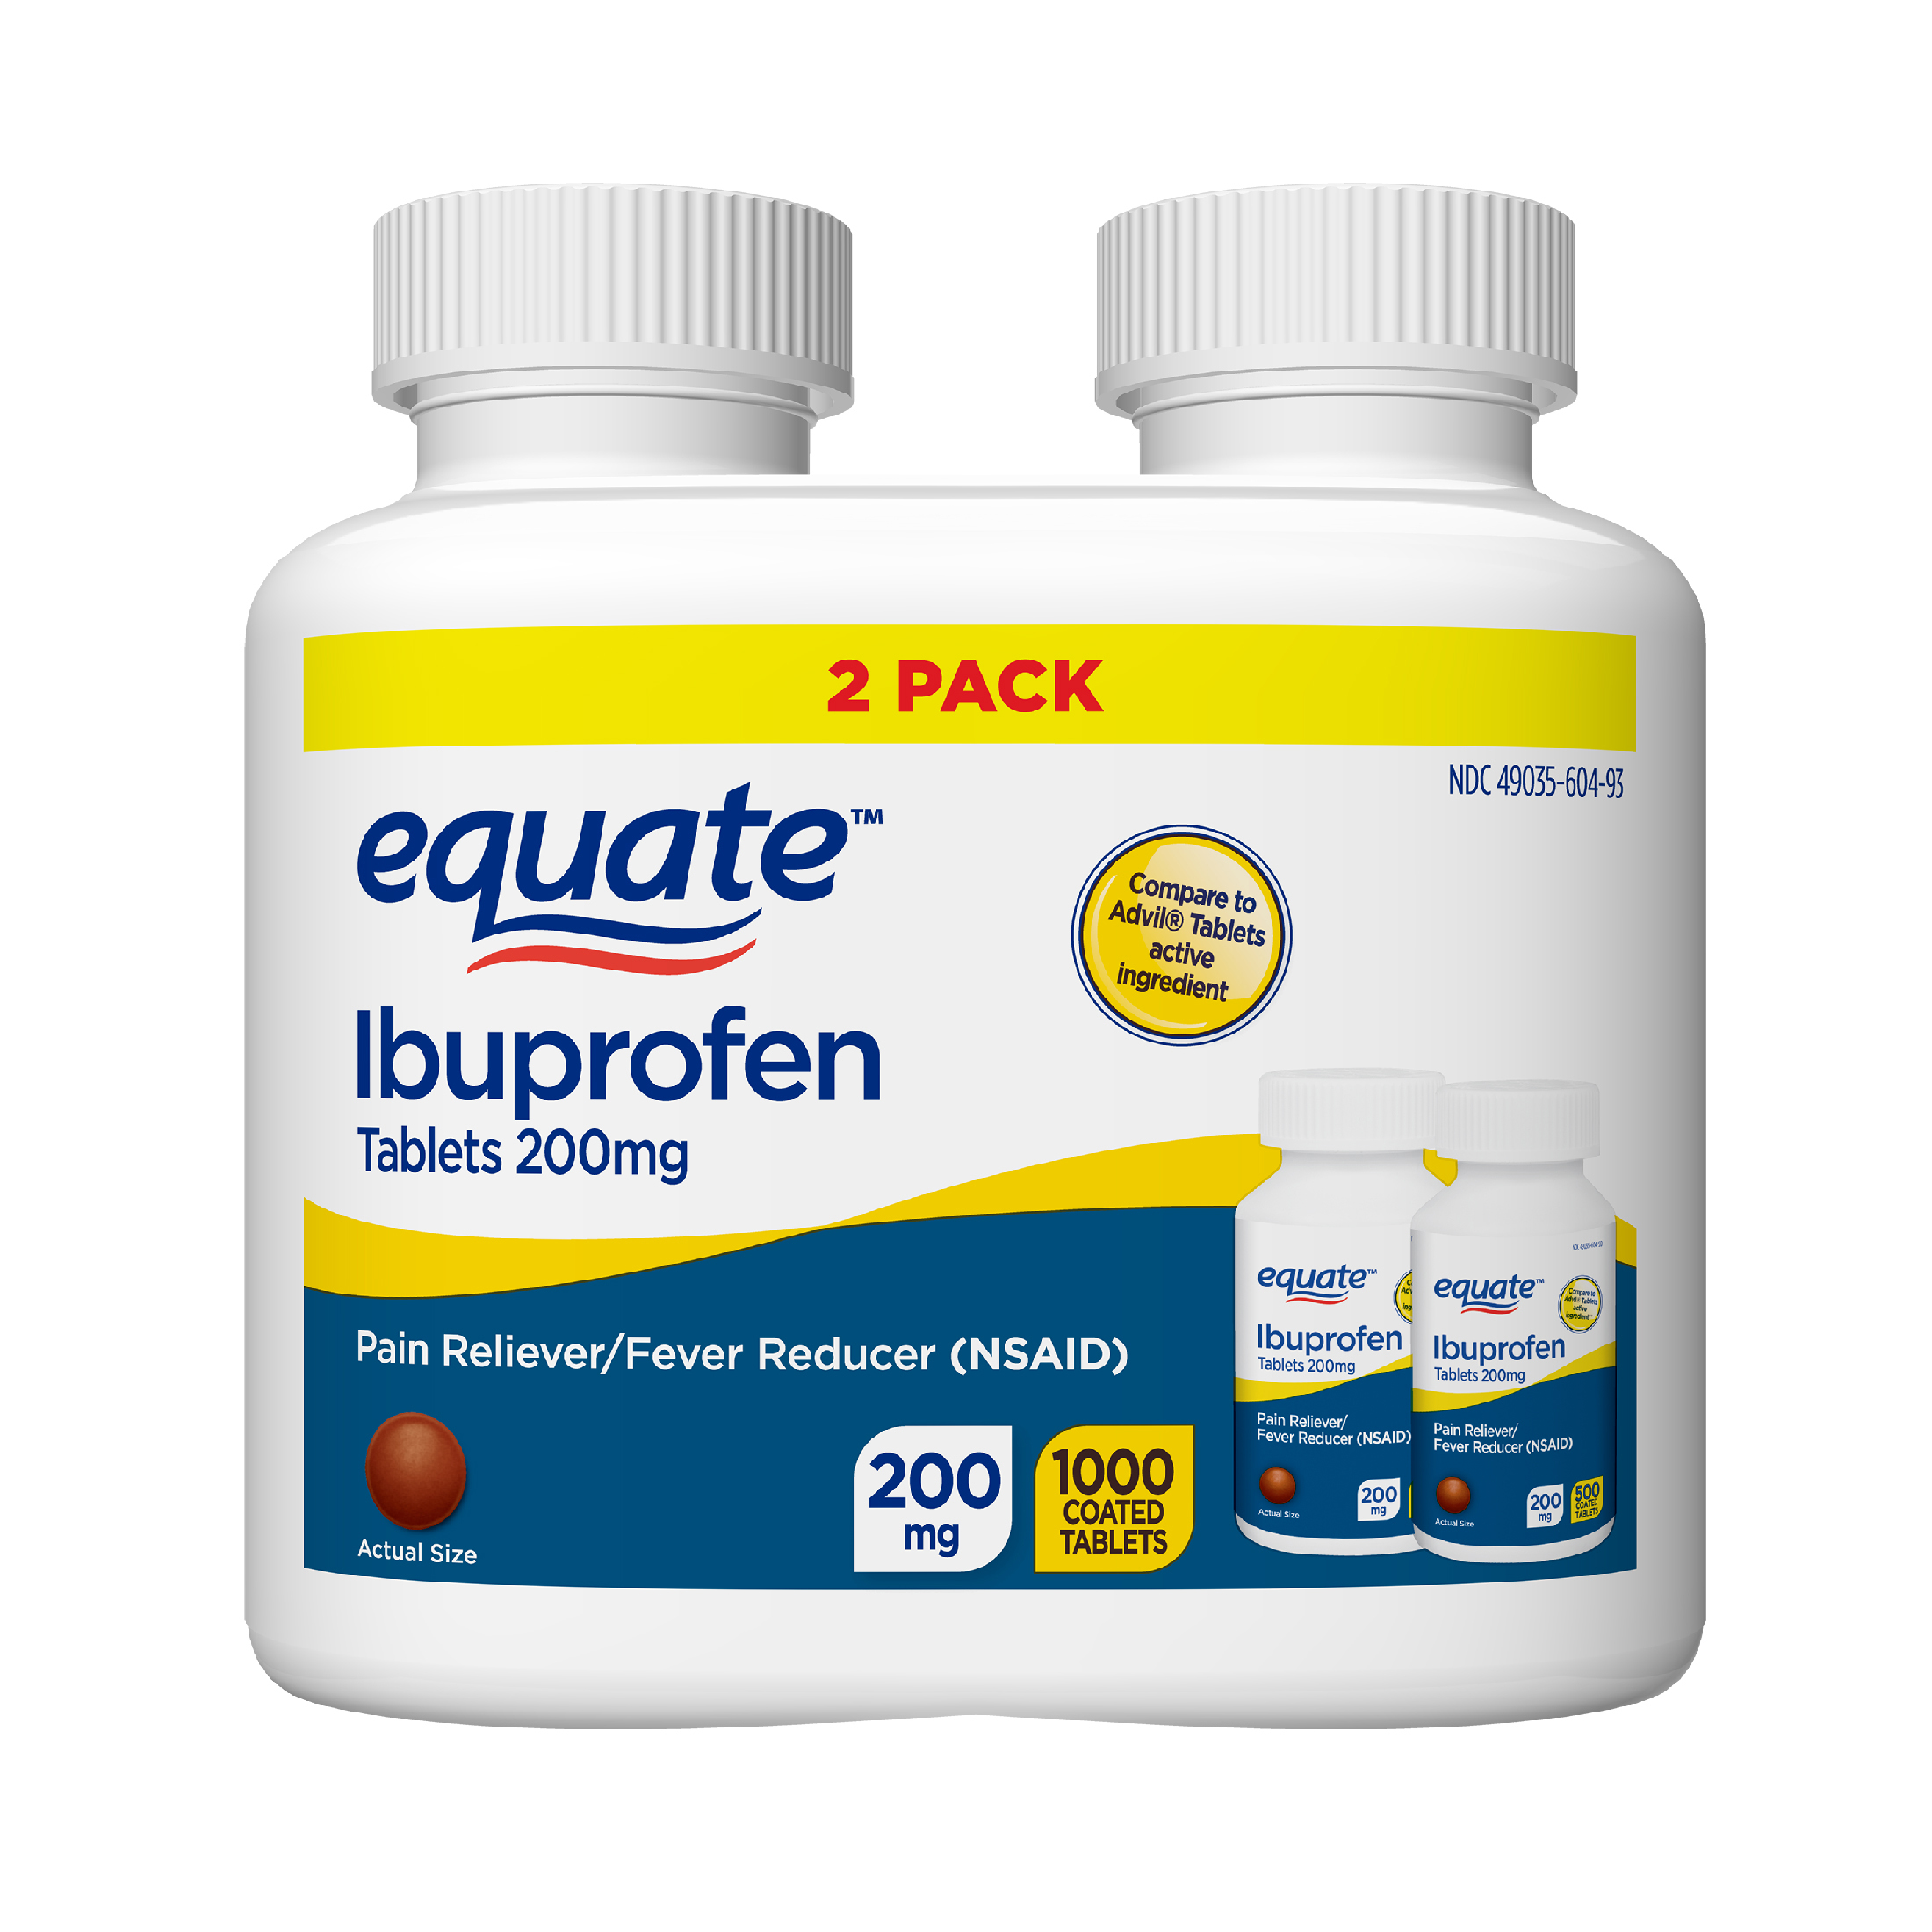 Equate Ibuprofen Tablets 200 mg, Pain Reliever/Fever Reducer, Twin Pack, 1000 Count - image 1 of 7